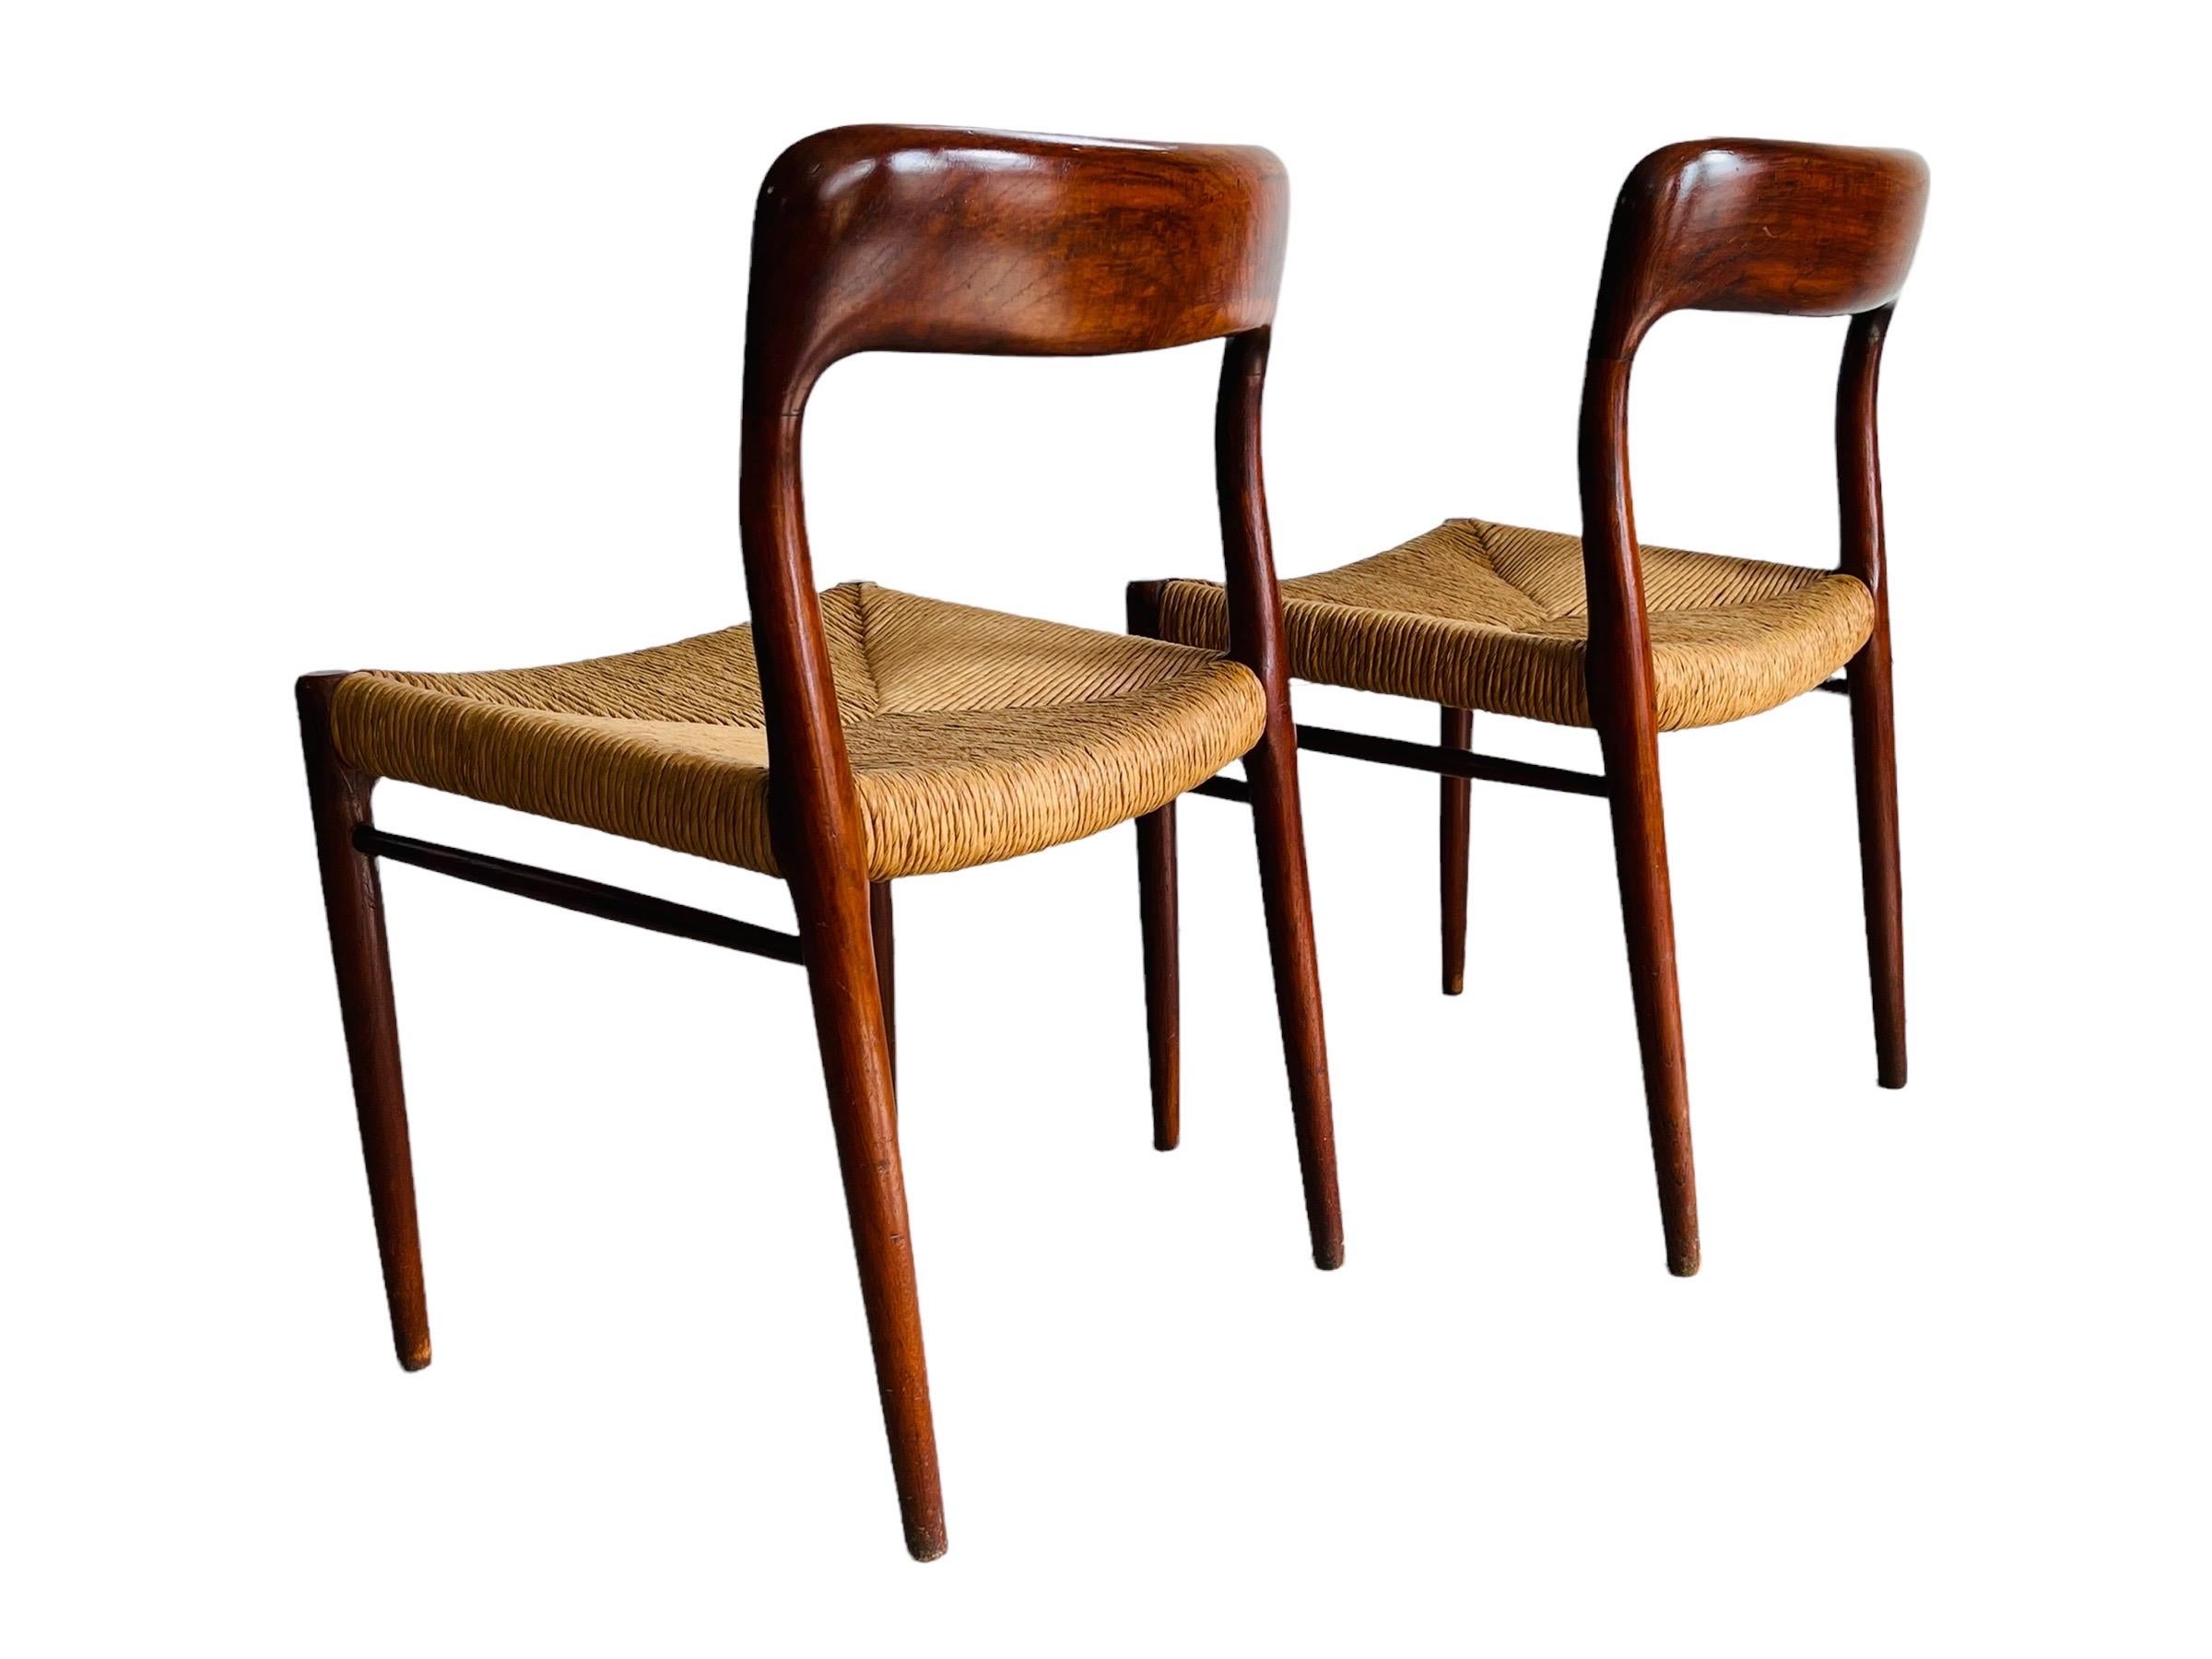 Two Niels Moller model #75 dining chairs in teak, beautifully aged. Both chairs are in good vintage condition with normal wear consistent with age and use. The chairs are sturdy and ready for use. 

Measures: W 20